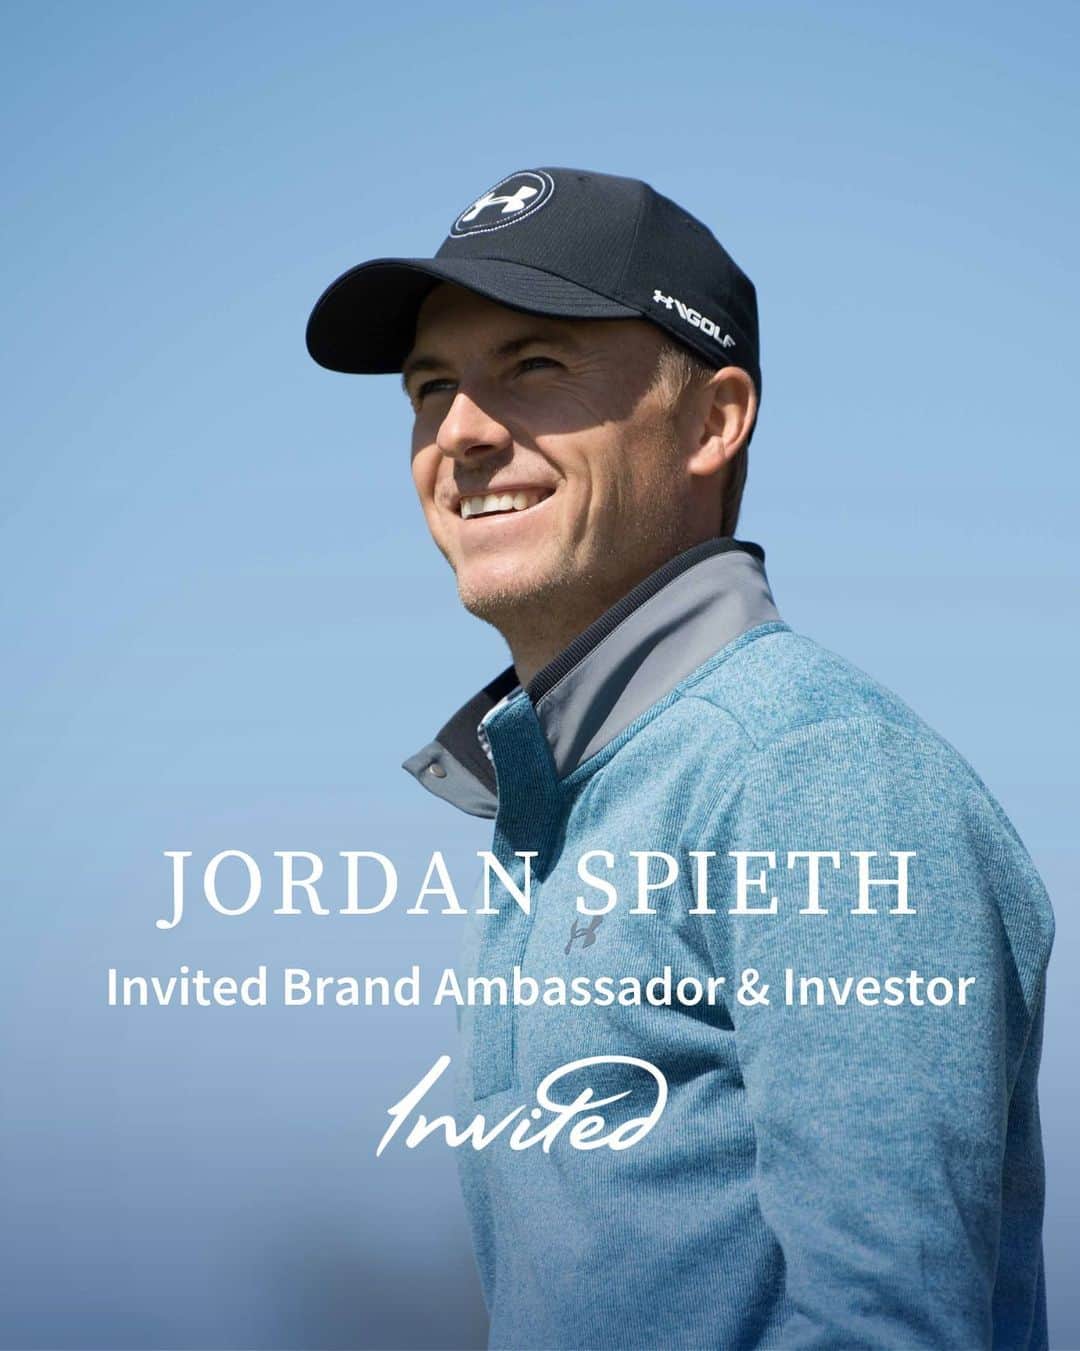 Jordan Spiethのインスタグラム：「We are honored to officially welcome @jordanspieth to the Invited family as a brand ambassador and investor! Our story together started at Brookhaven Country Club where Jordan developed a love for golf. We look forward to sharing our passion for philanthropy and growing the game together.」